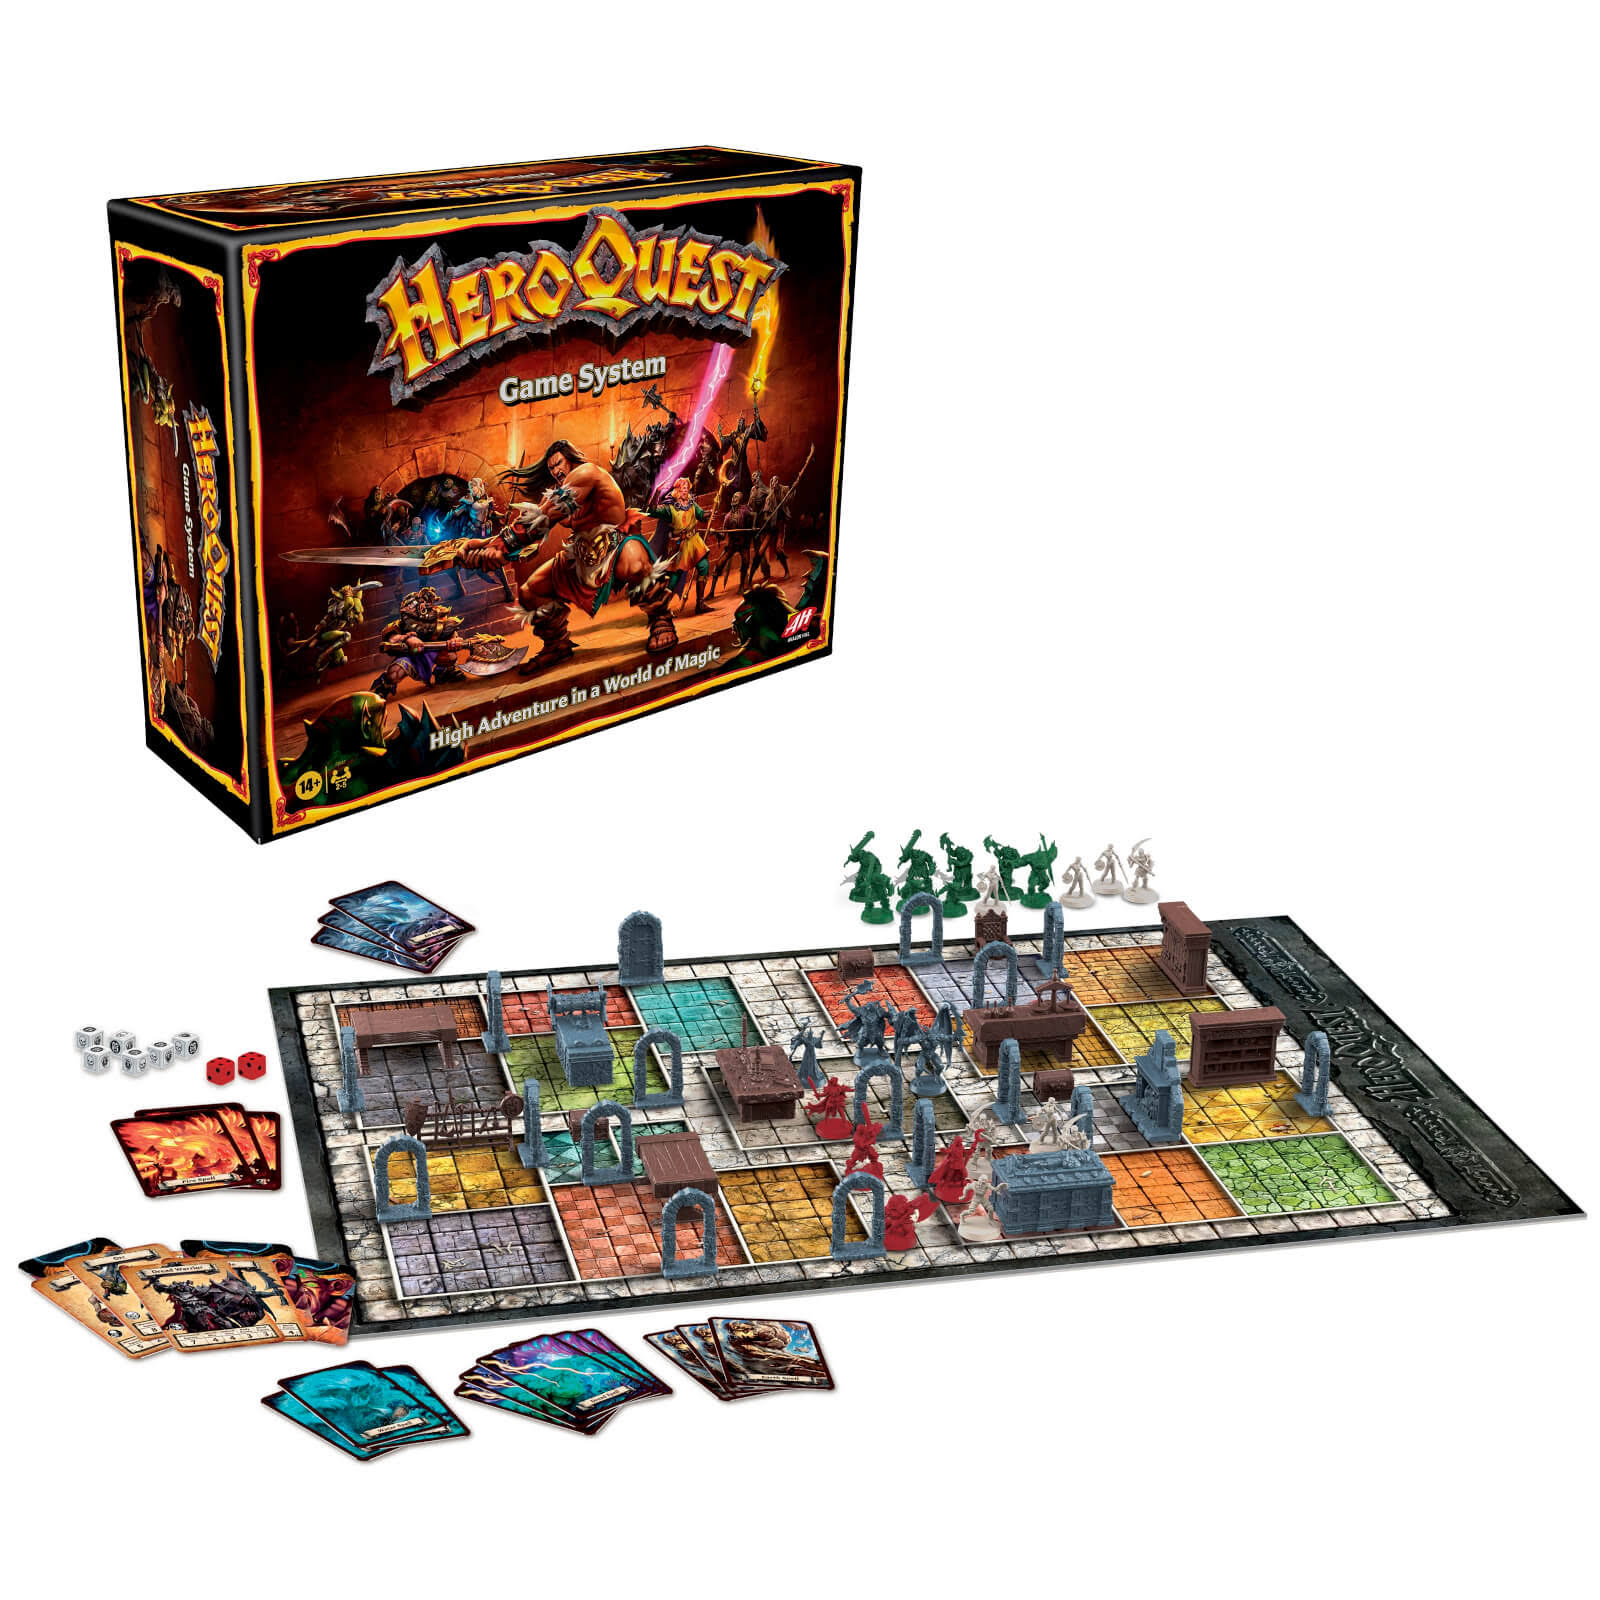 Hasbro Heroquest Game System